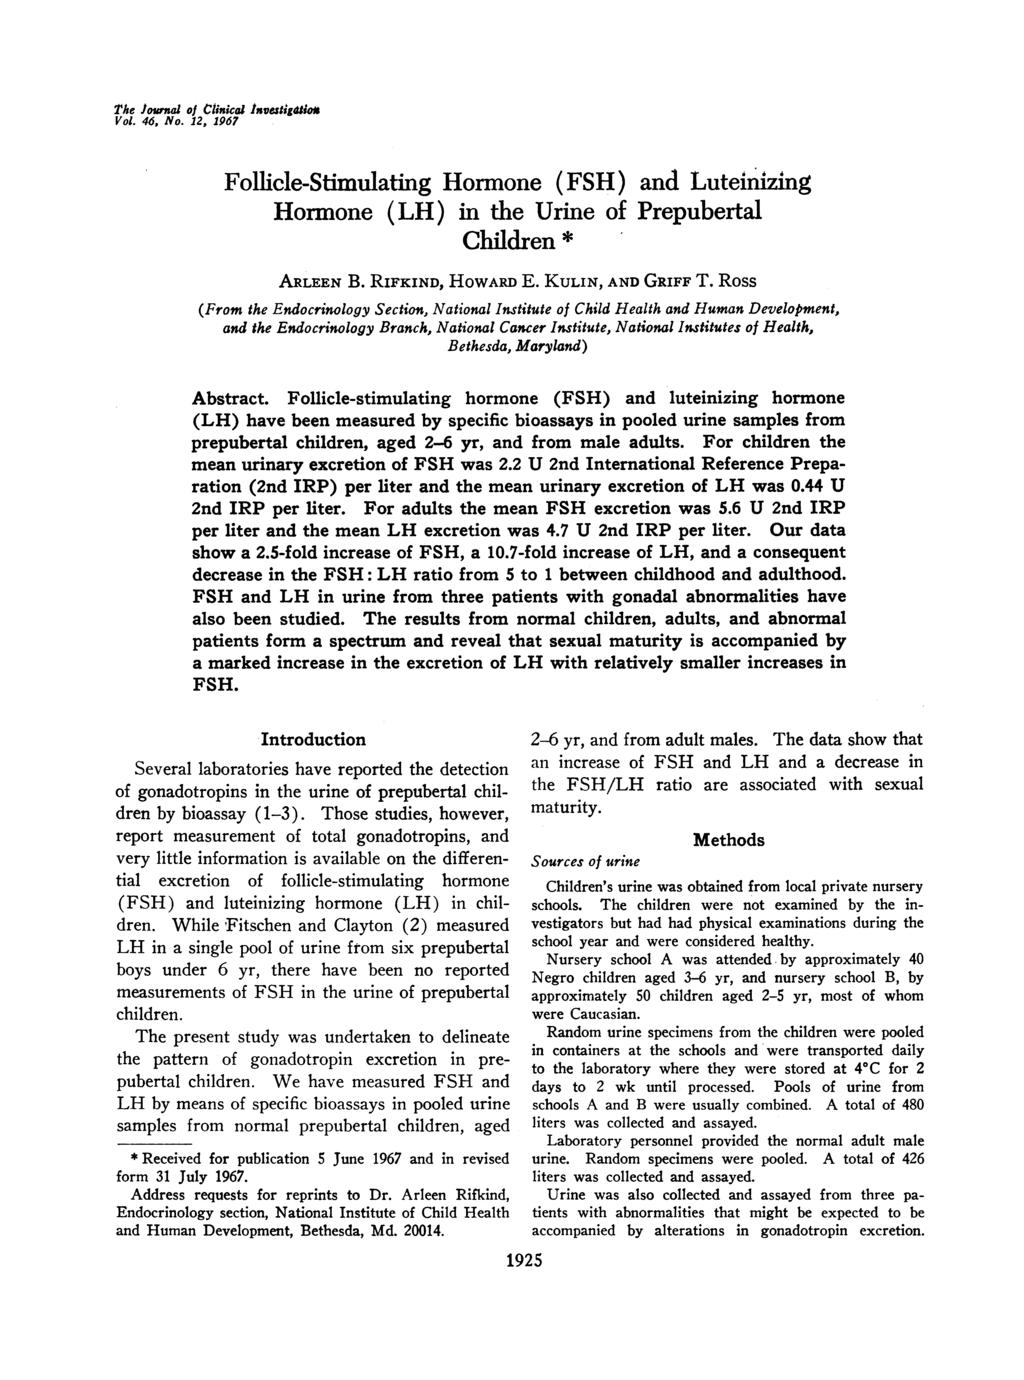 The Journal of Clinical Invest'gaio* Vol. 46, No. 12, 1967 Follicle-Stimulating Hormone (FSH) and Luteinzing Hormone (LH) in the Urine of Prepubertal Children * ARLEEN B. RIFKIND, HOWARD E.